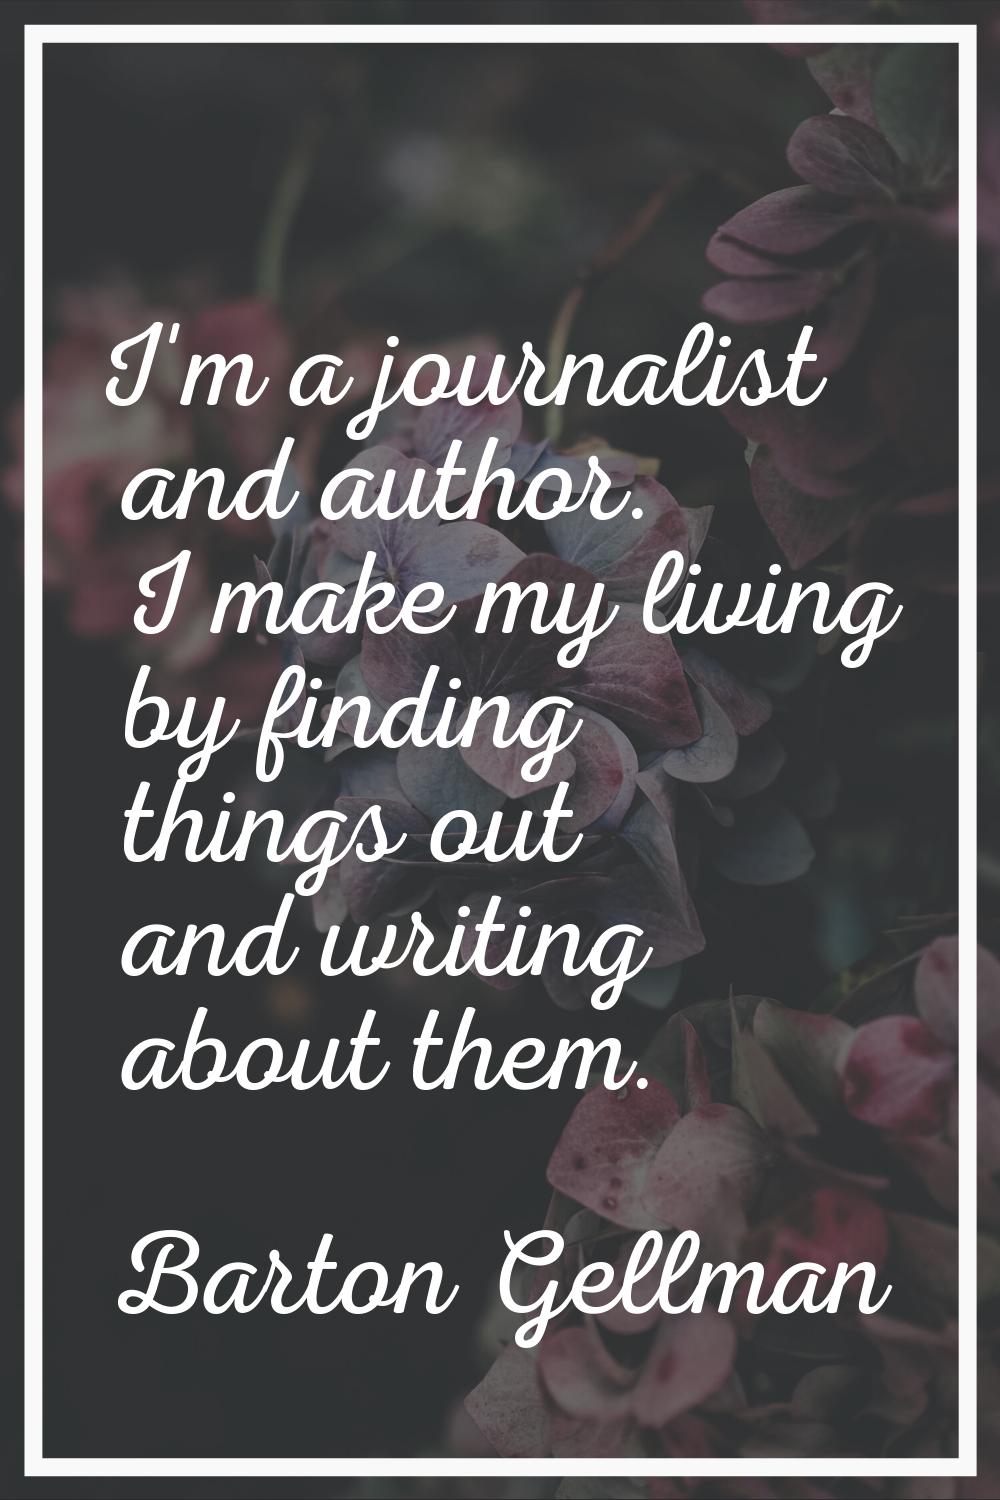 I'm a journalist and author. I make my living by finding things out and writing about them.